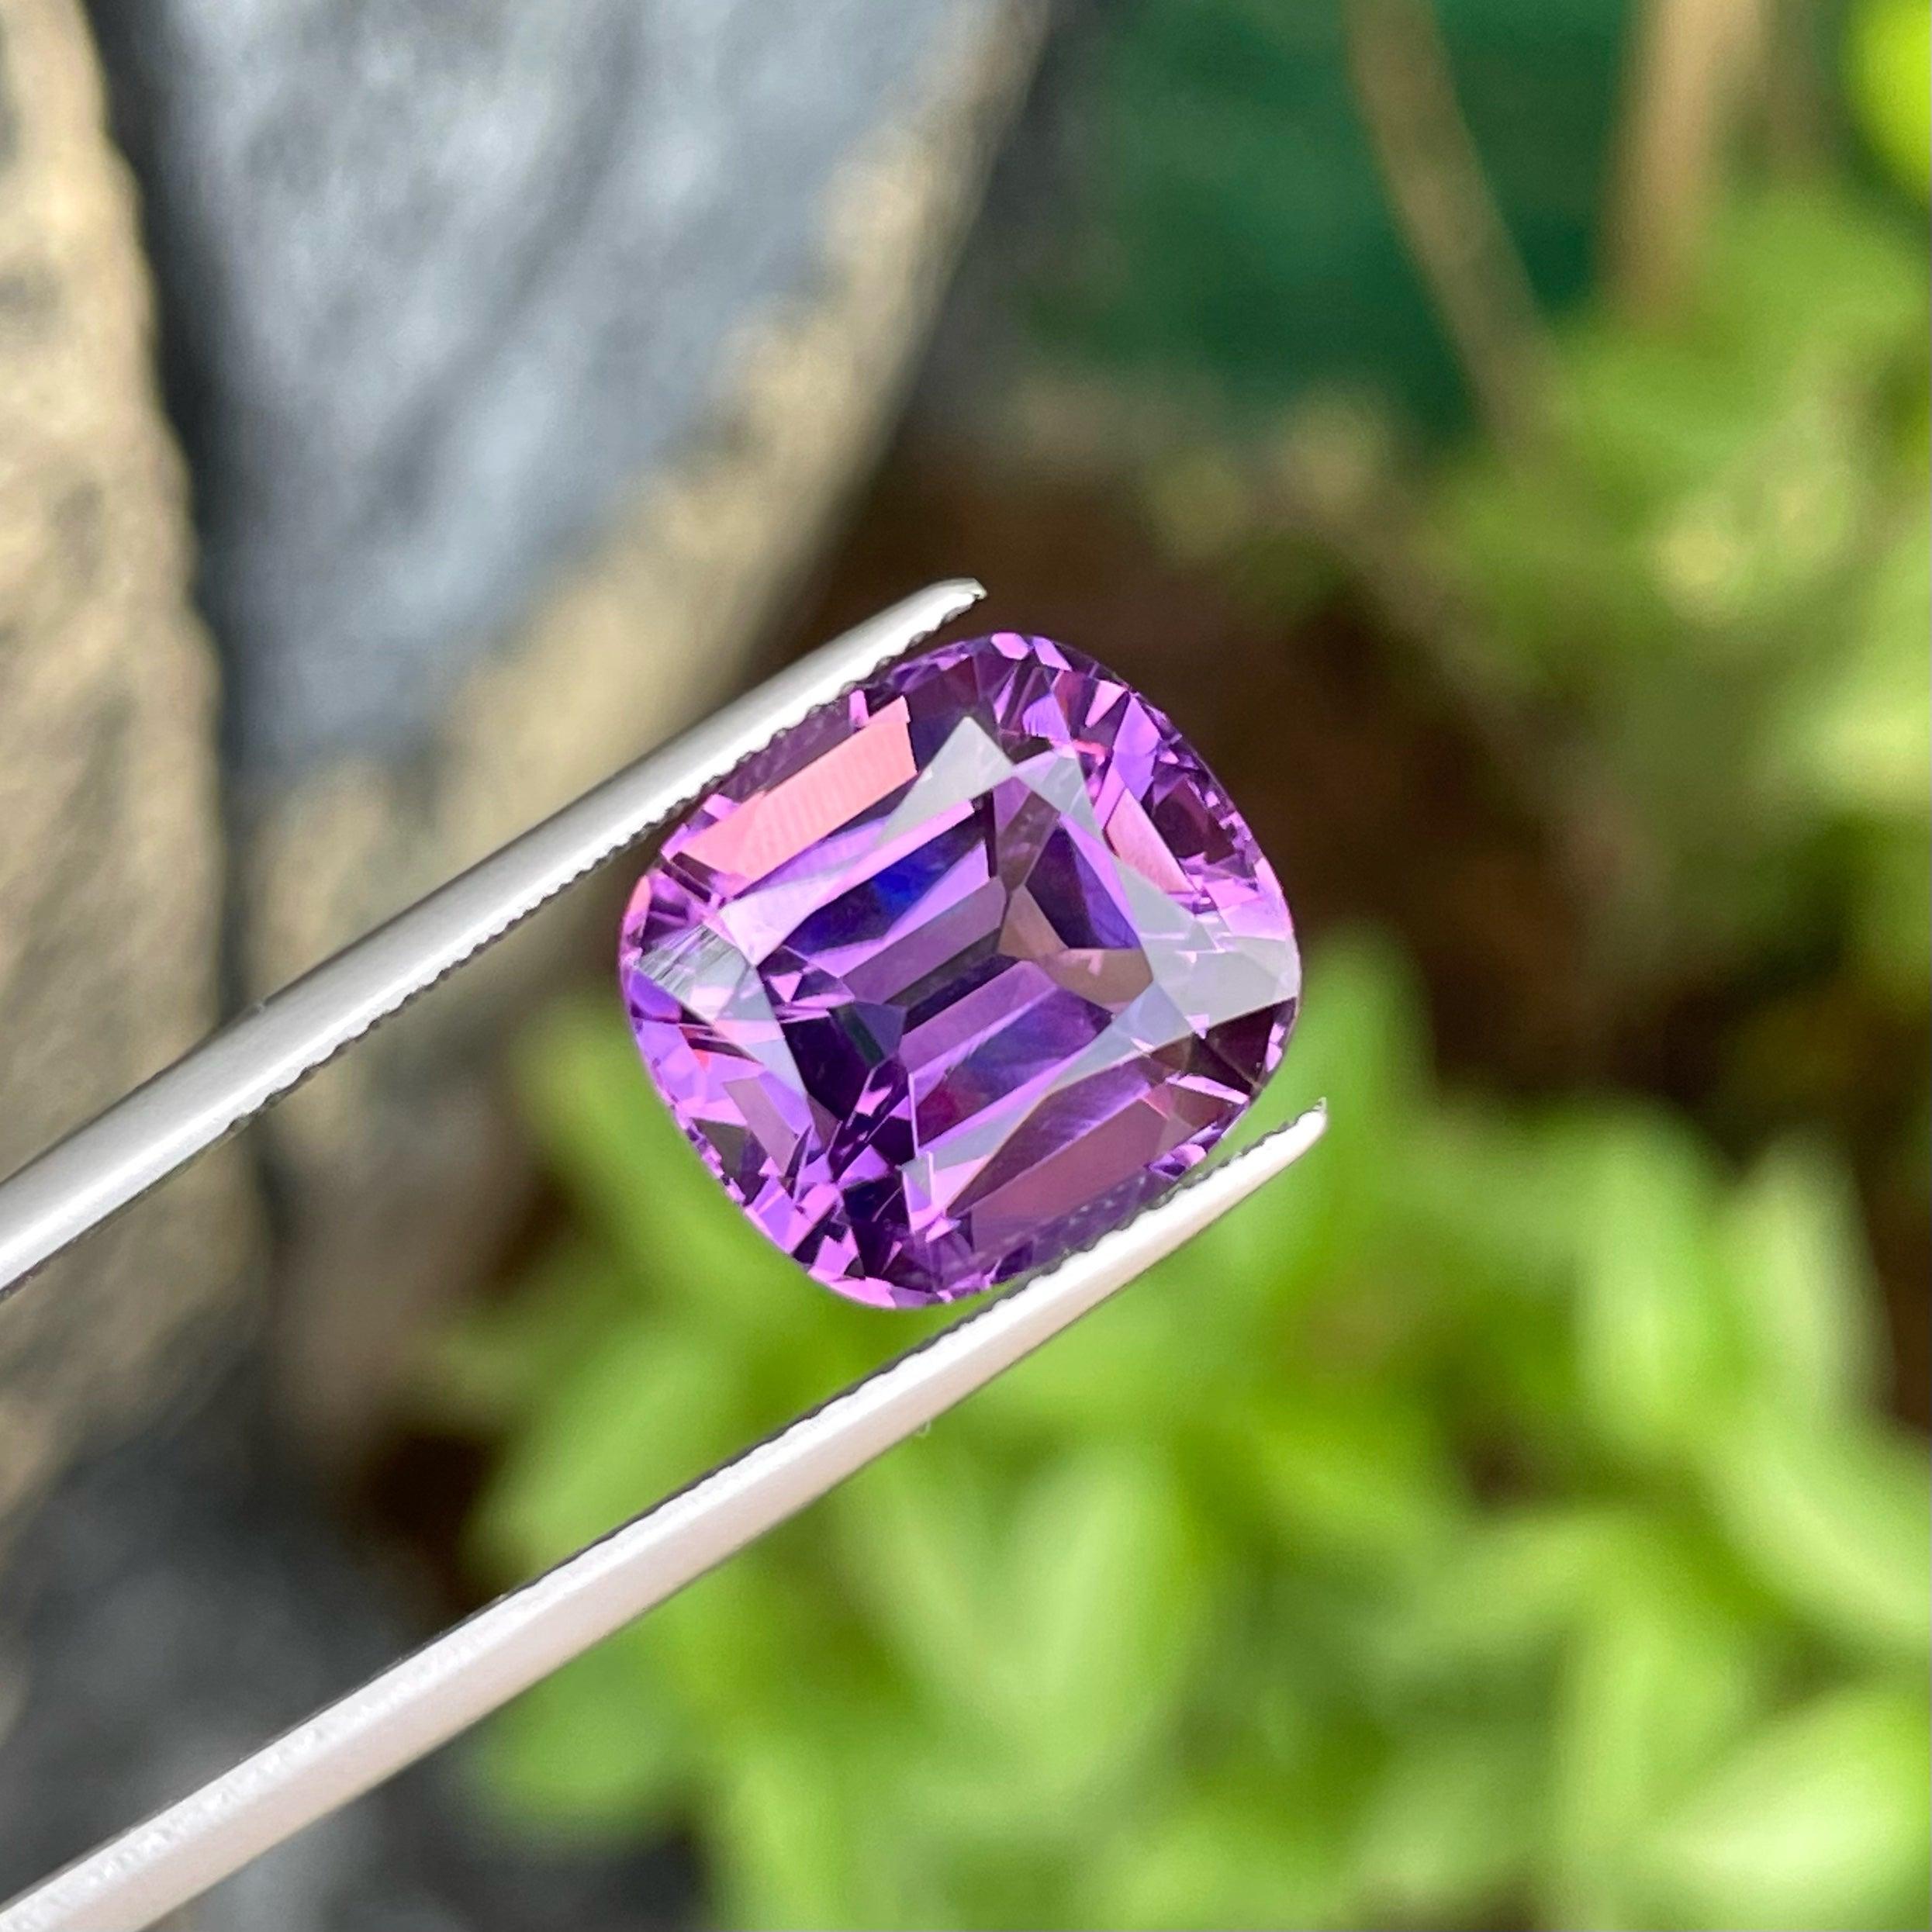 Cushion-Cut Soft Purple Amethyst Gemstone, available for sale, natural high quality flawless 8.61 carats, cushion cut amethyst from Brazil.

 Product Information:
GEMSTONE TYPE	Cushion-Cut Soft Purple Amethyst Gemstone
WEIGHT	8.16